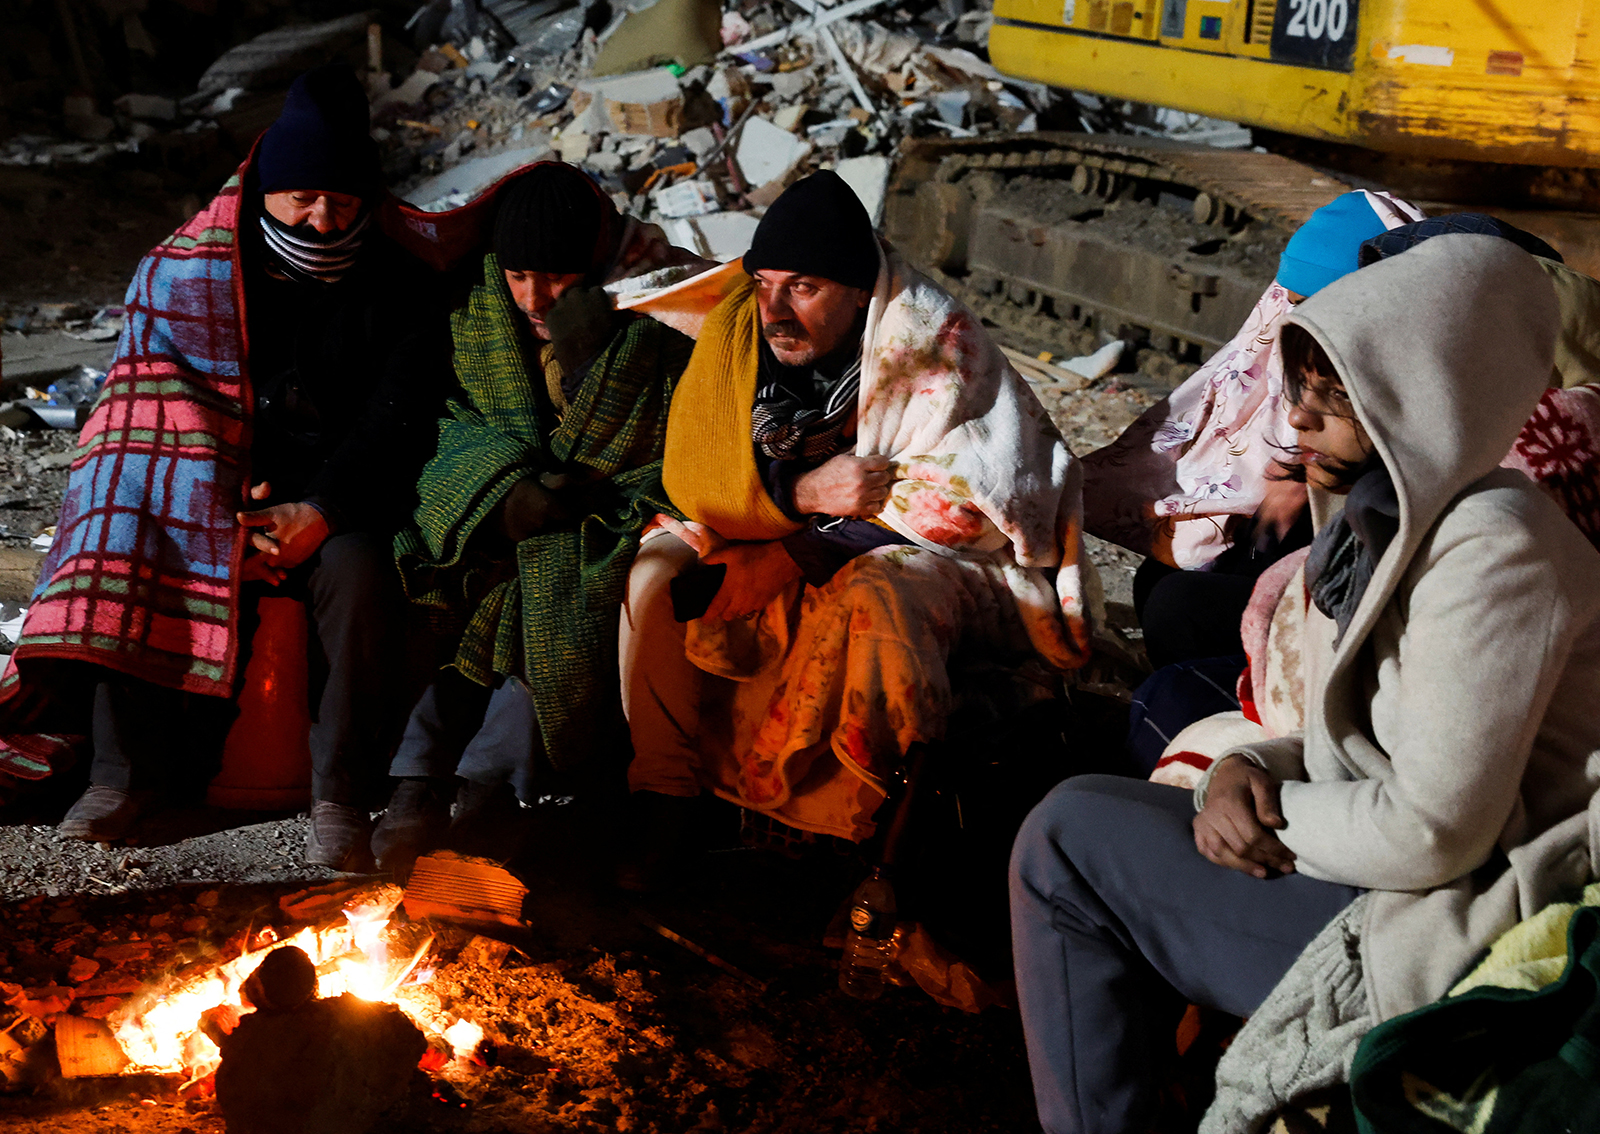 People rescued by rsecue group ISAR Germany,  wait by a fire during the rescue operation in Kirikhan, Turkey on February 10. 